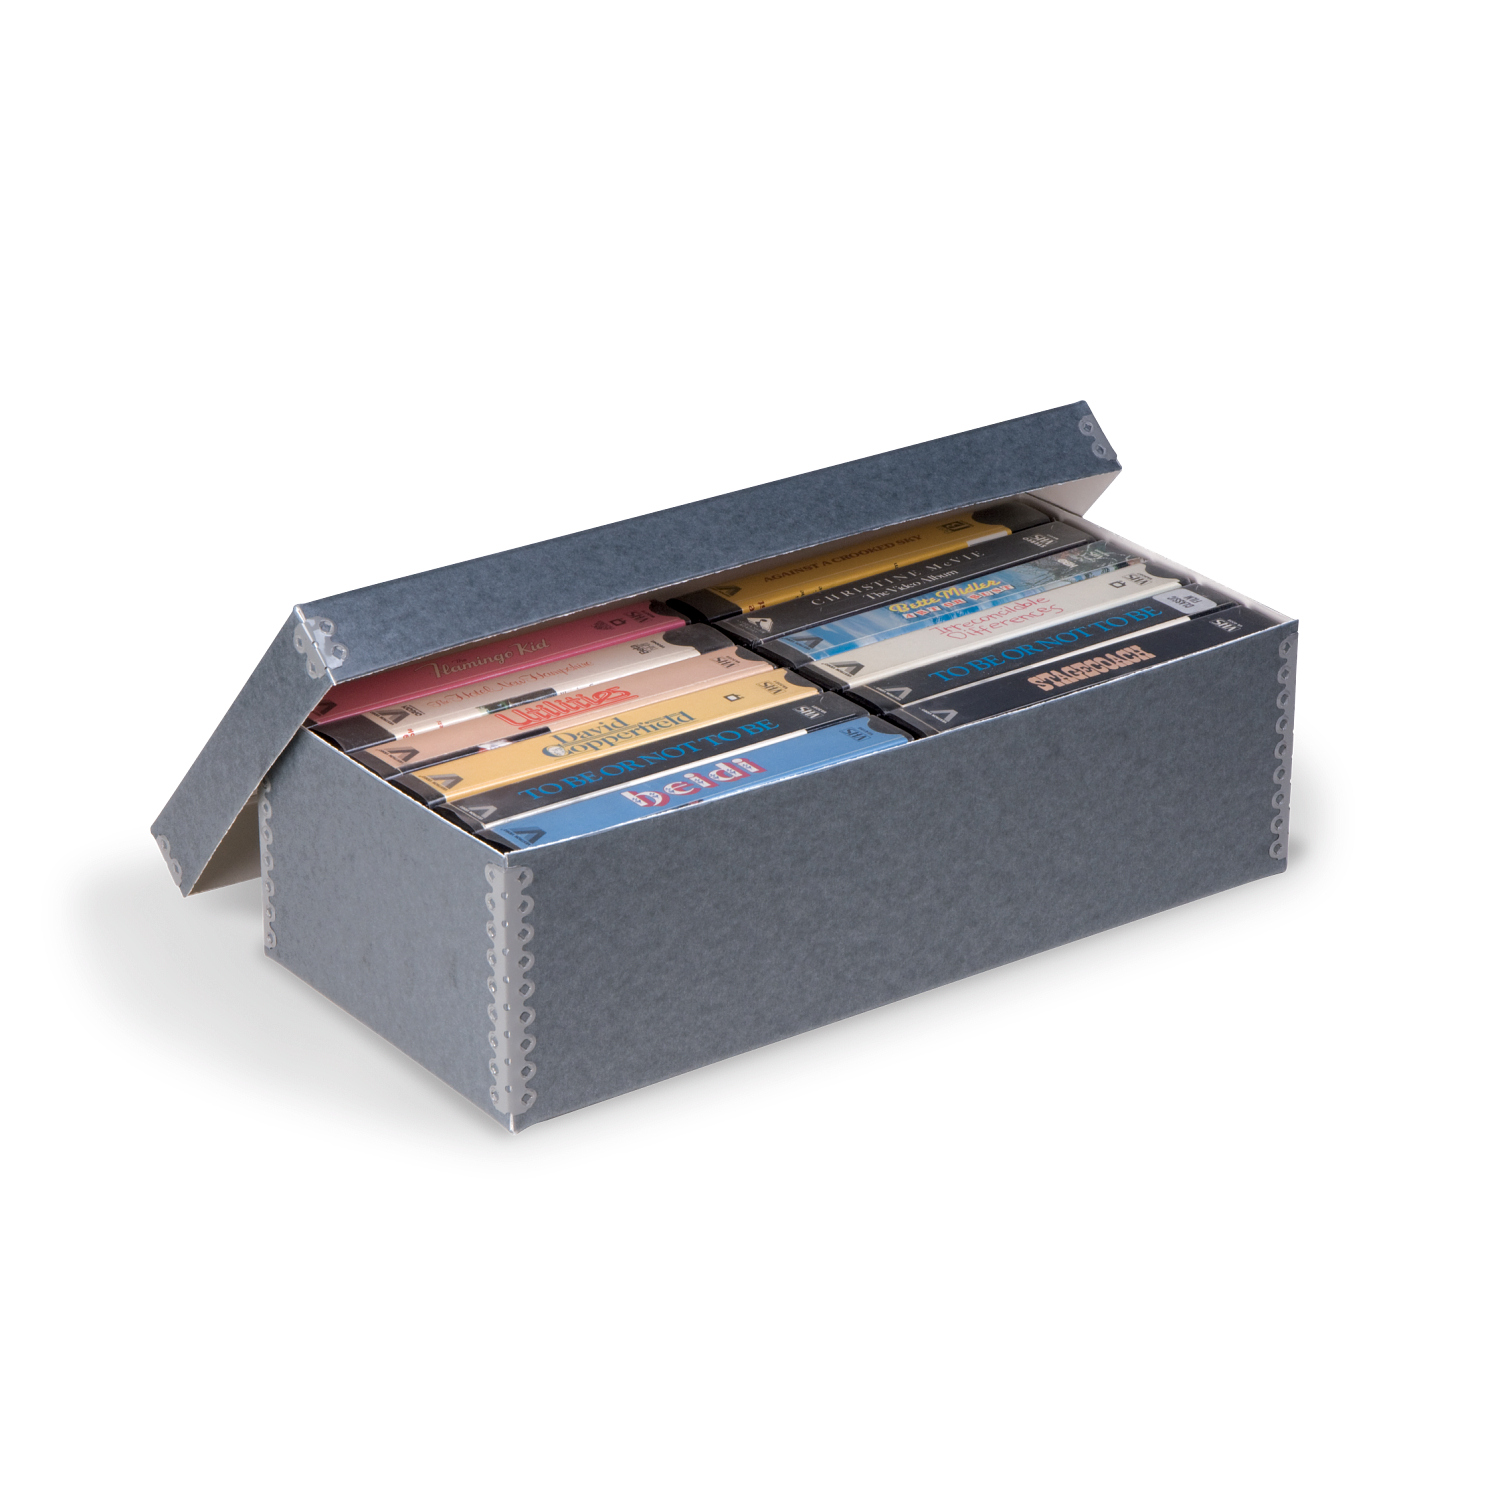 Gaylord Archival® Flip-Top 16 LP Record Box